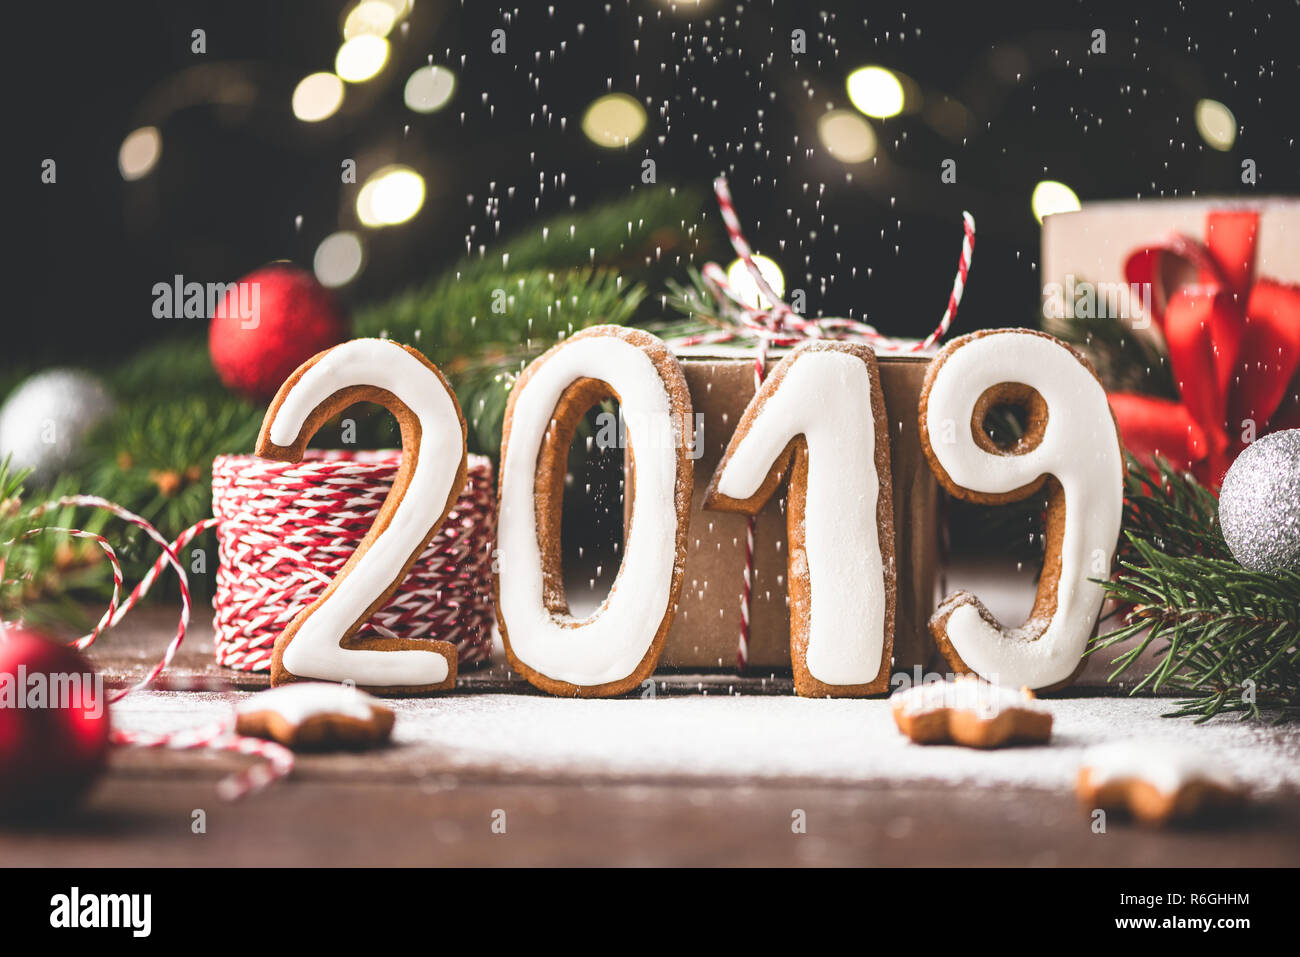 Happy New Year 2019 greeting made with gingerbread cookies, christmas lights and artificial snow Stock Photo